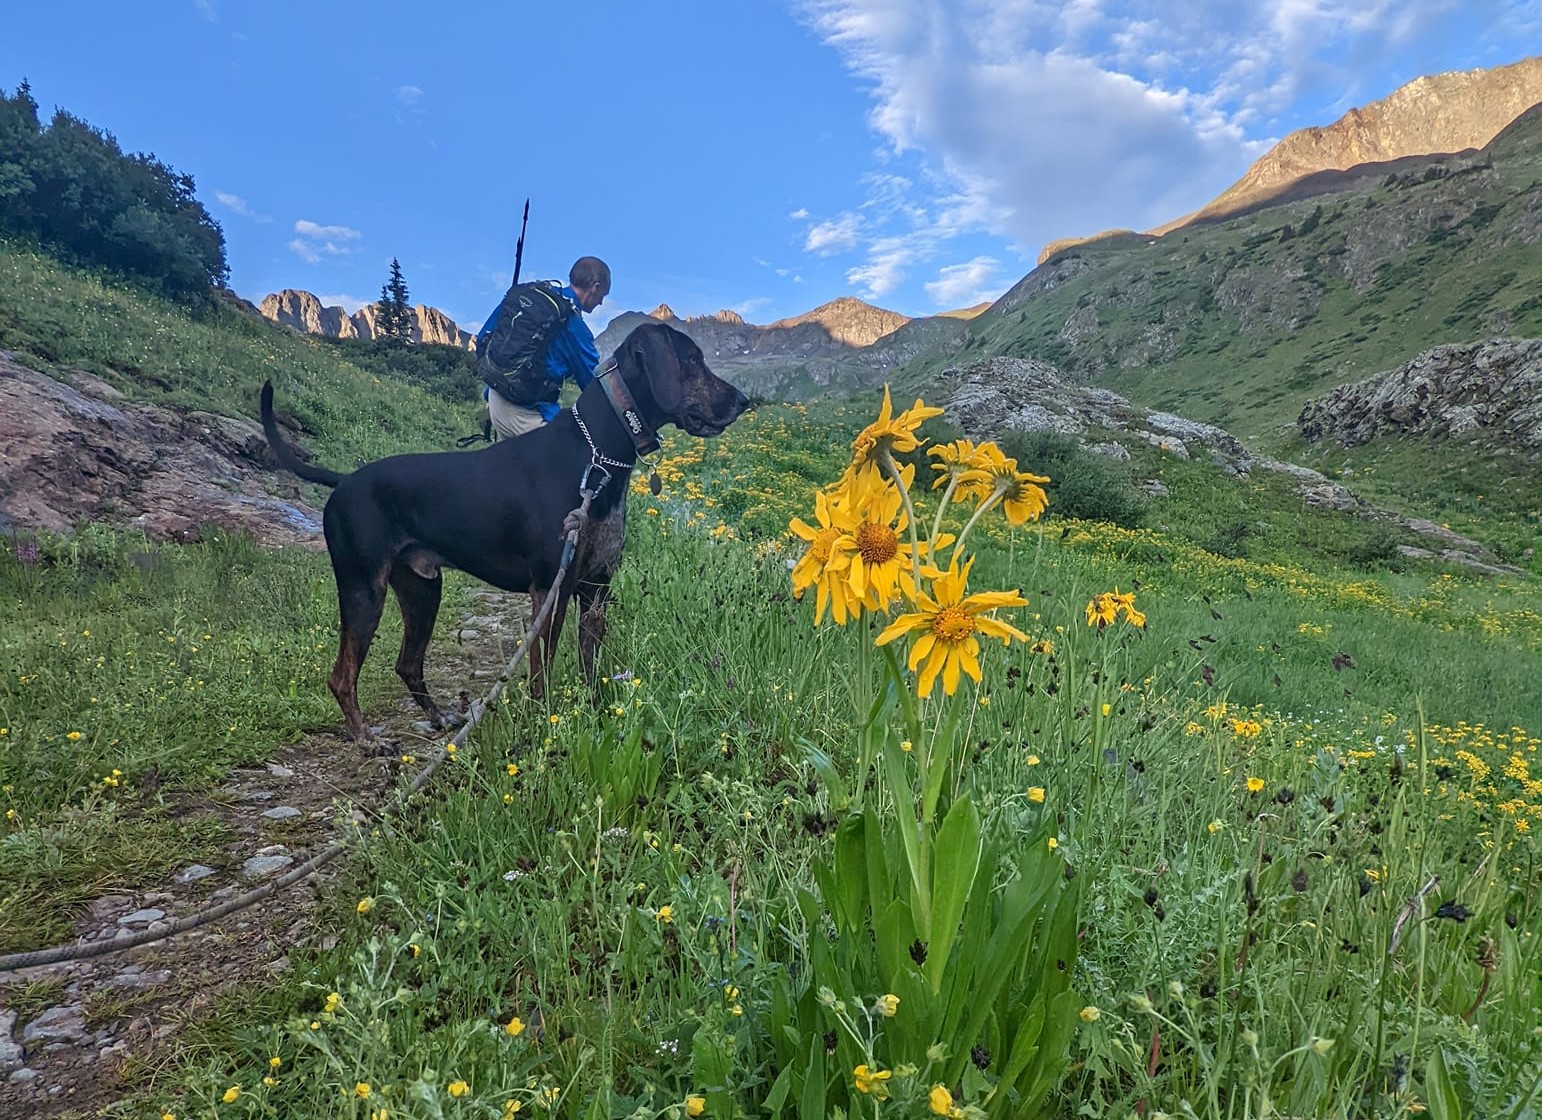 Waylon the Plott Hound searches for little creatures scurrying amid the amazing scenery in the American Basin. Included are the colorful and abundant bursts of wildflowers.